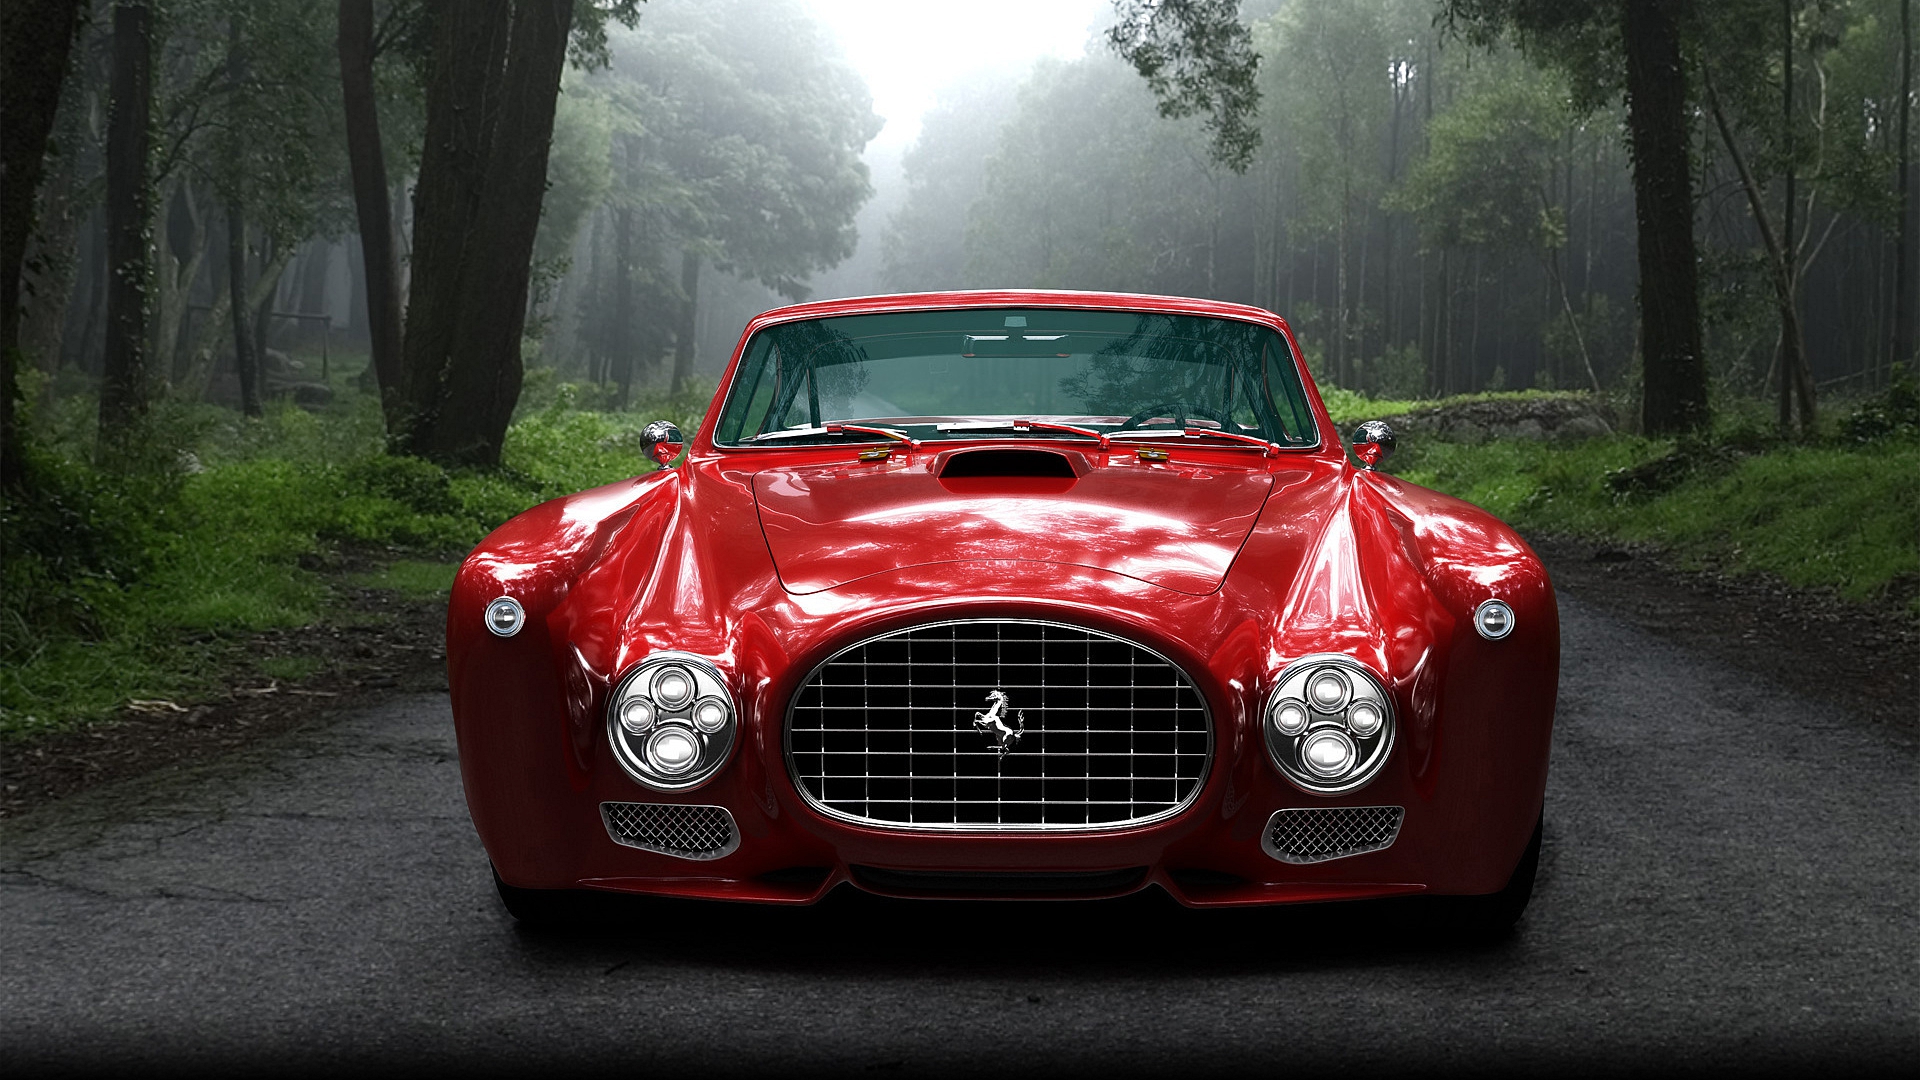 Colorful Photography Car Ferrari Vehicle Frontal View Red Cars Trees Nature Reflection Sunlight 1920x1080